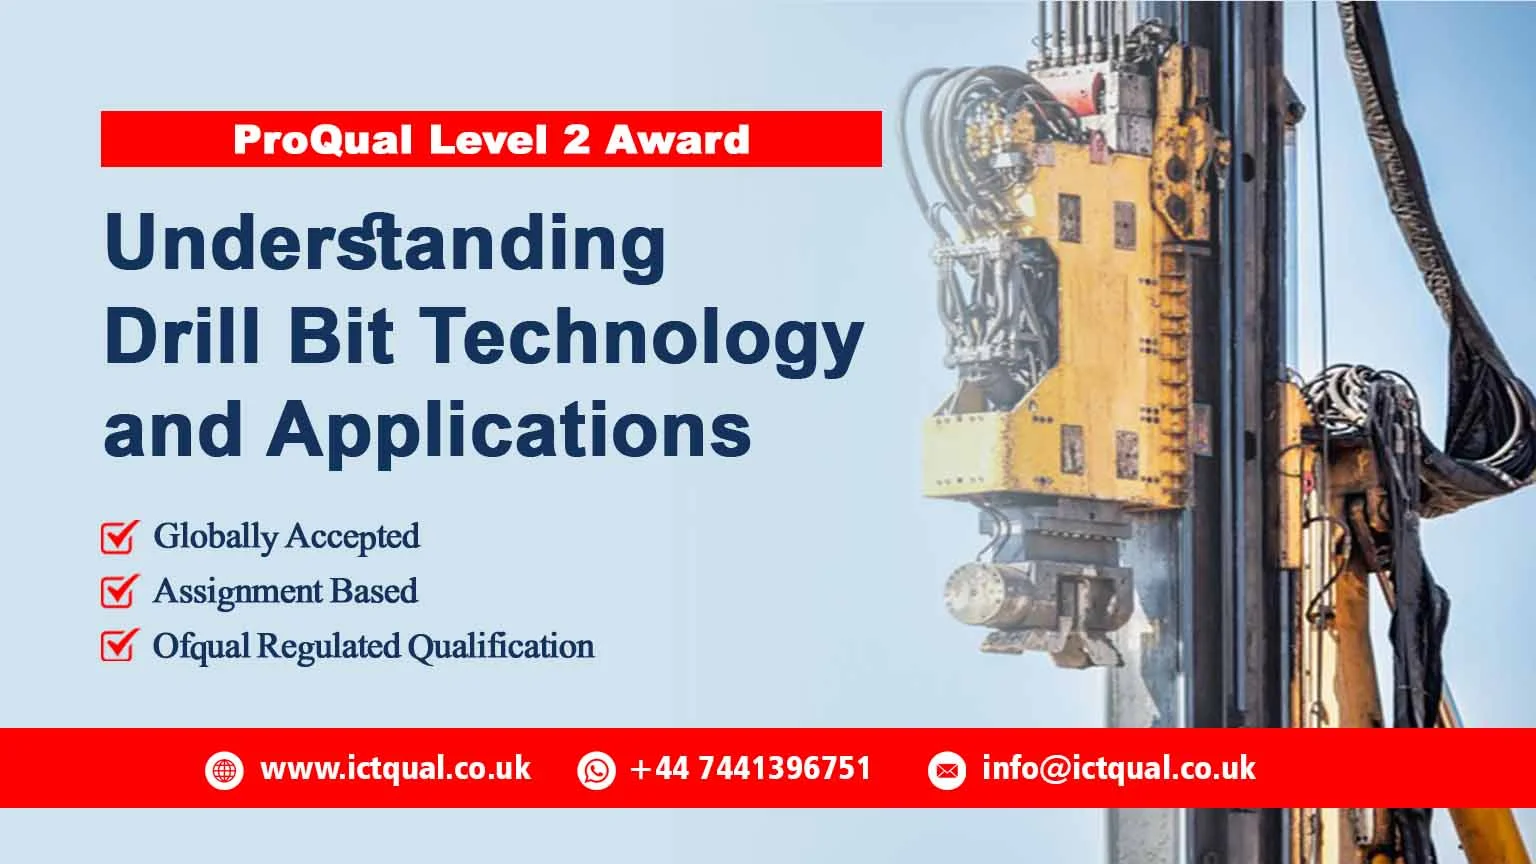 ProQual Level 2 Award in Understanding Drill Bit Technology and Applications